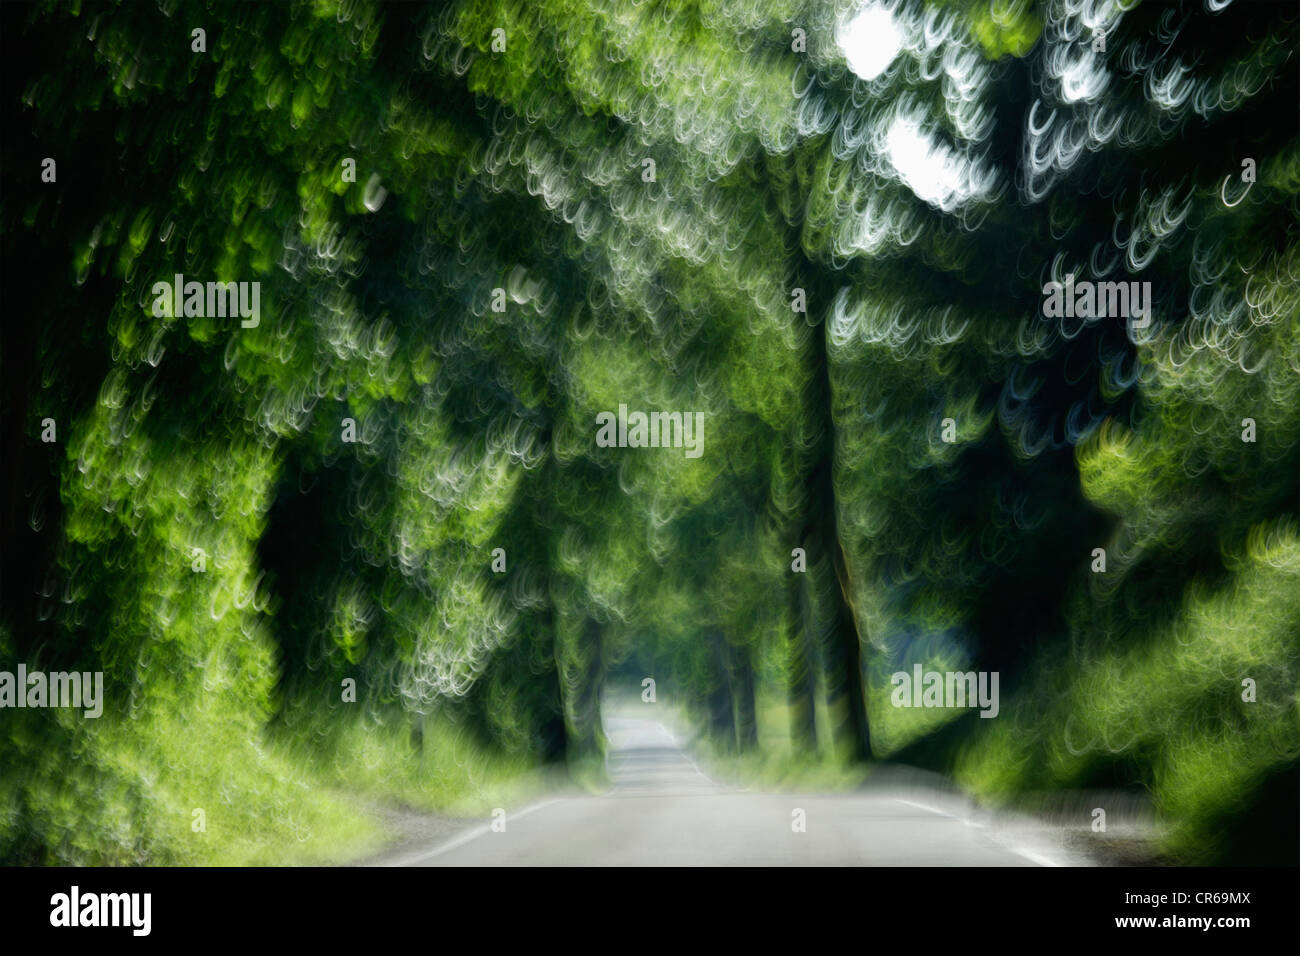 Germany, Bavaria, Country road through tree-lined, blurred motion Stock Photo